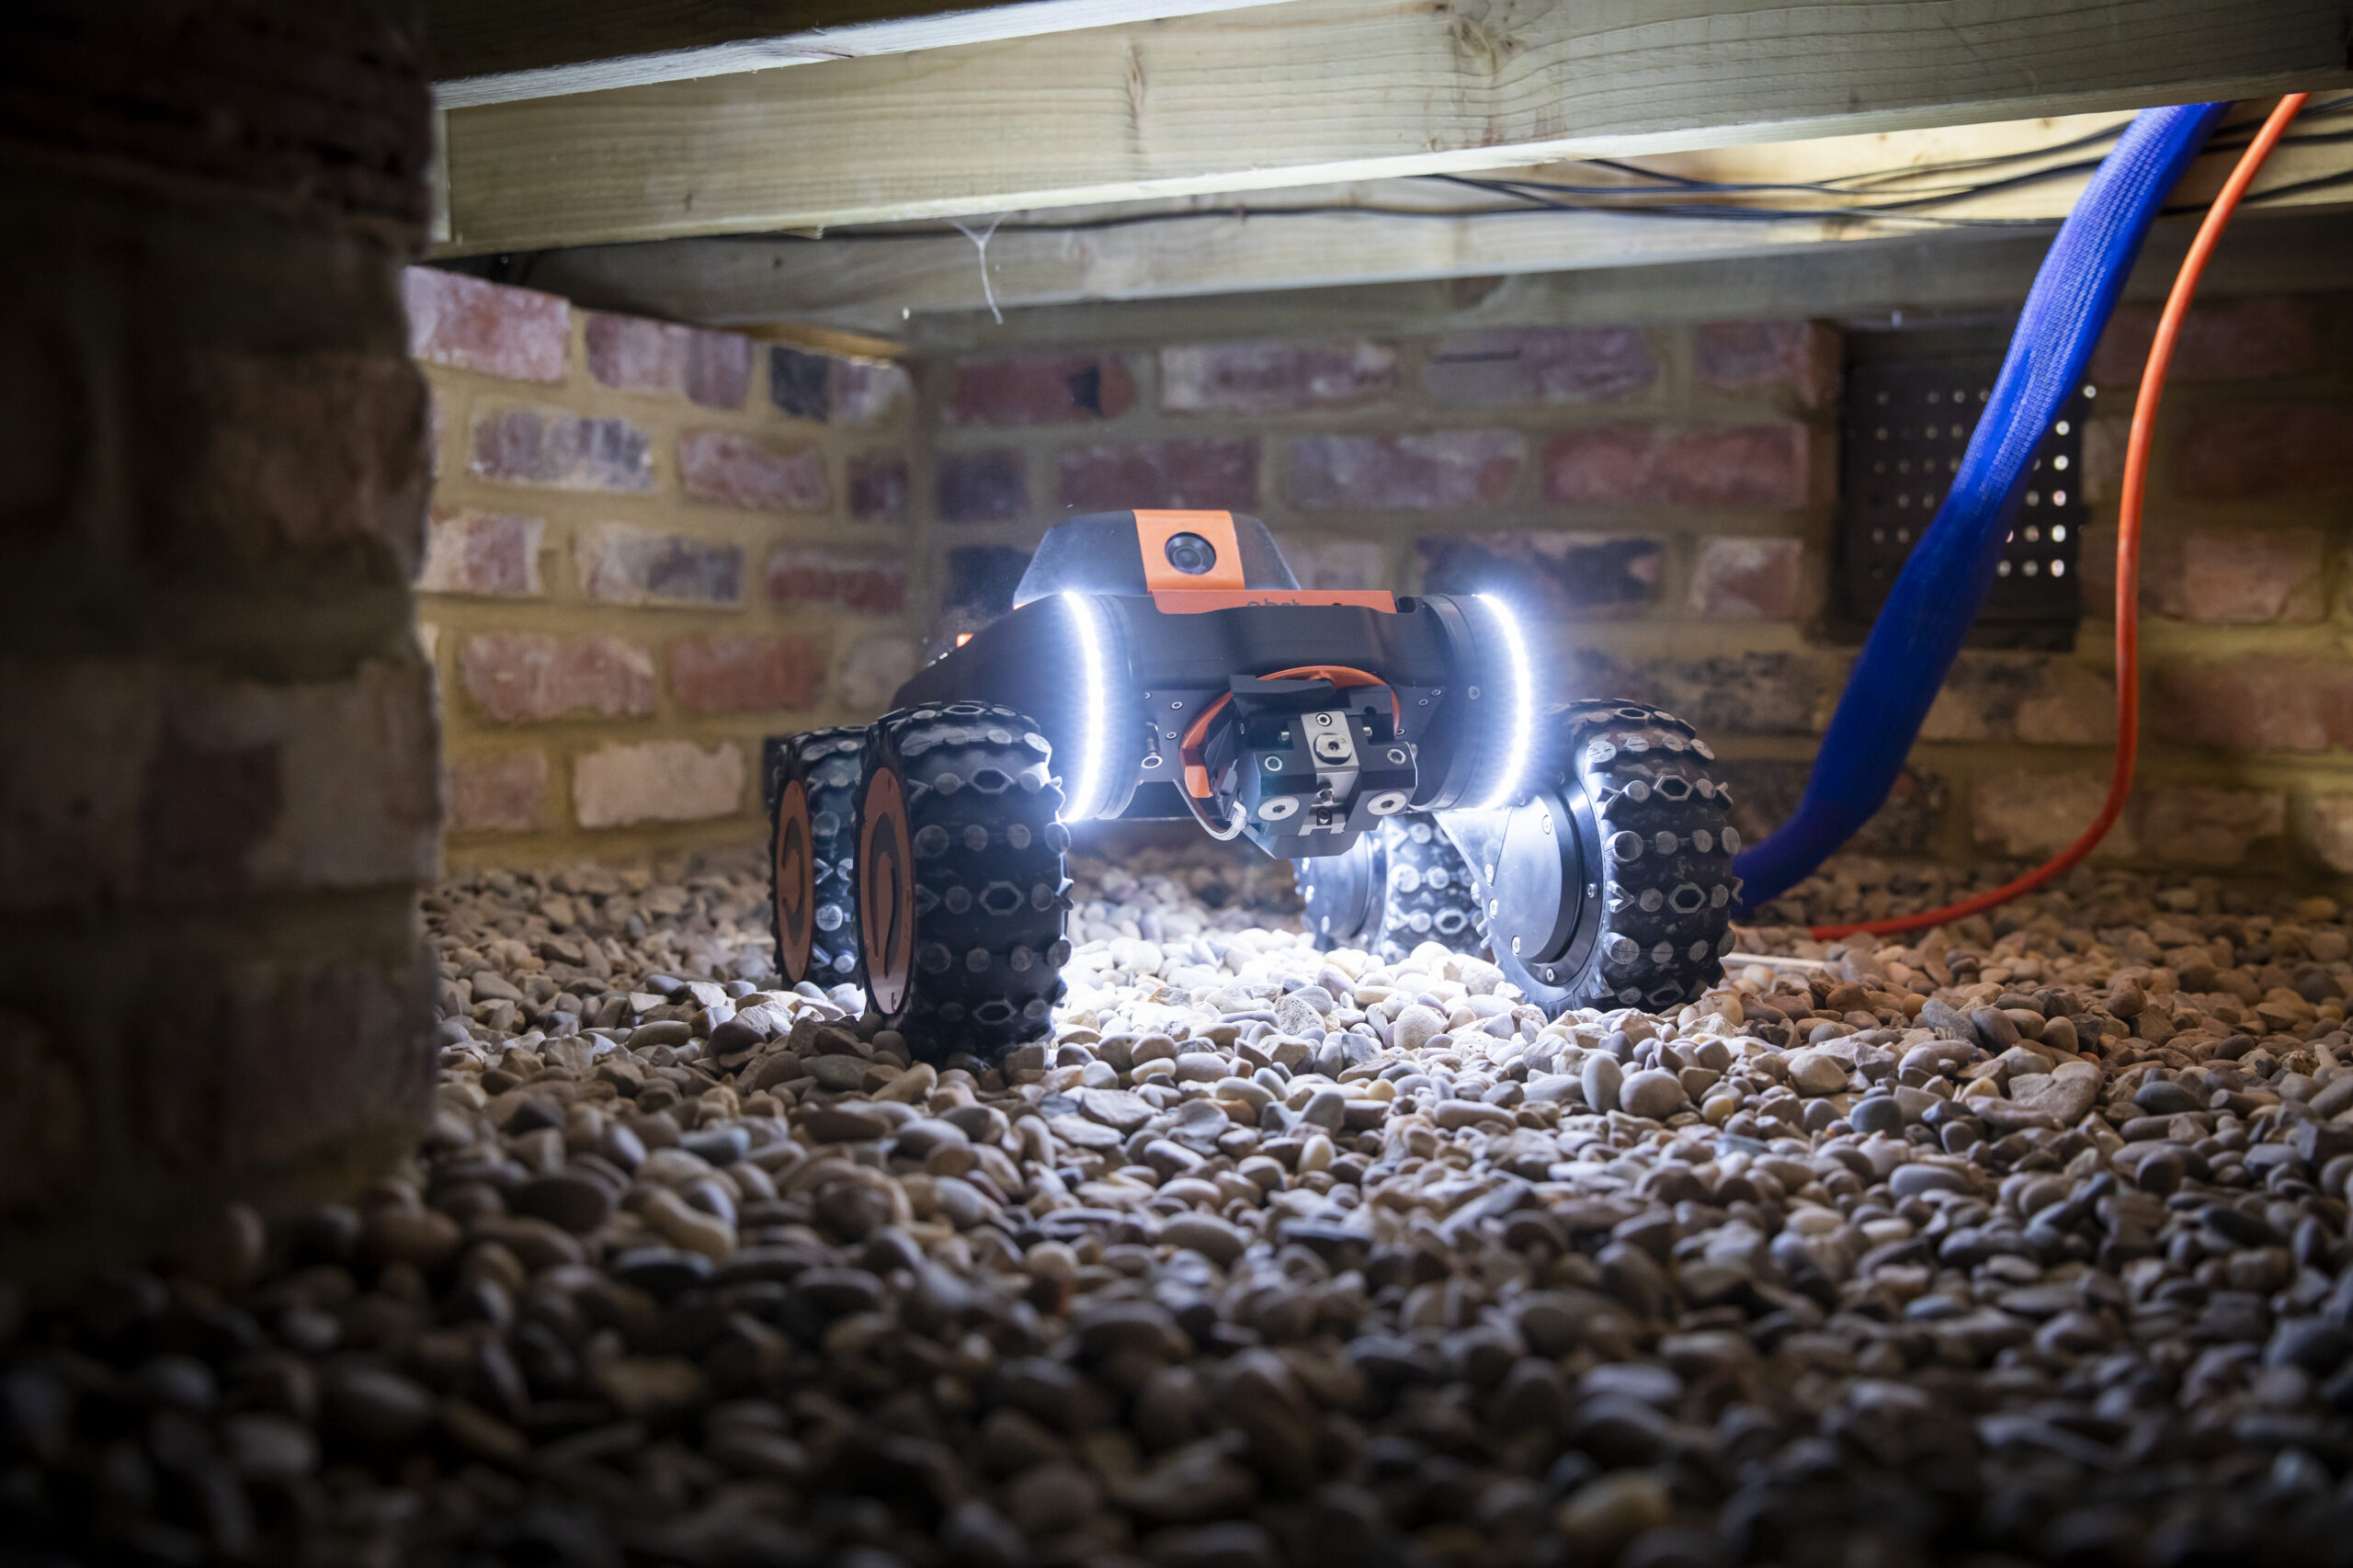 Q-Bot robot operating under the floor area of a home